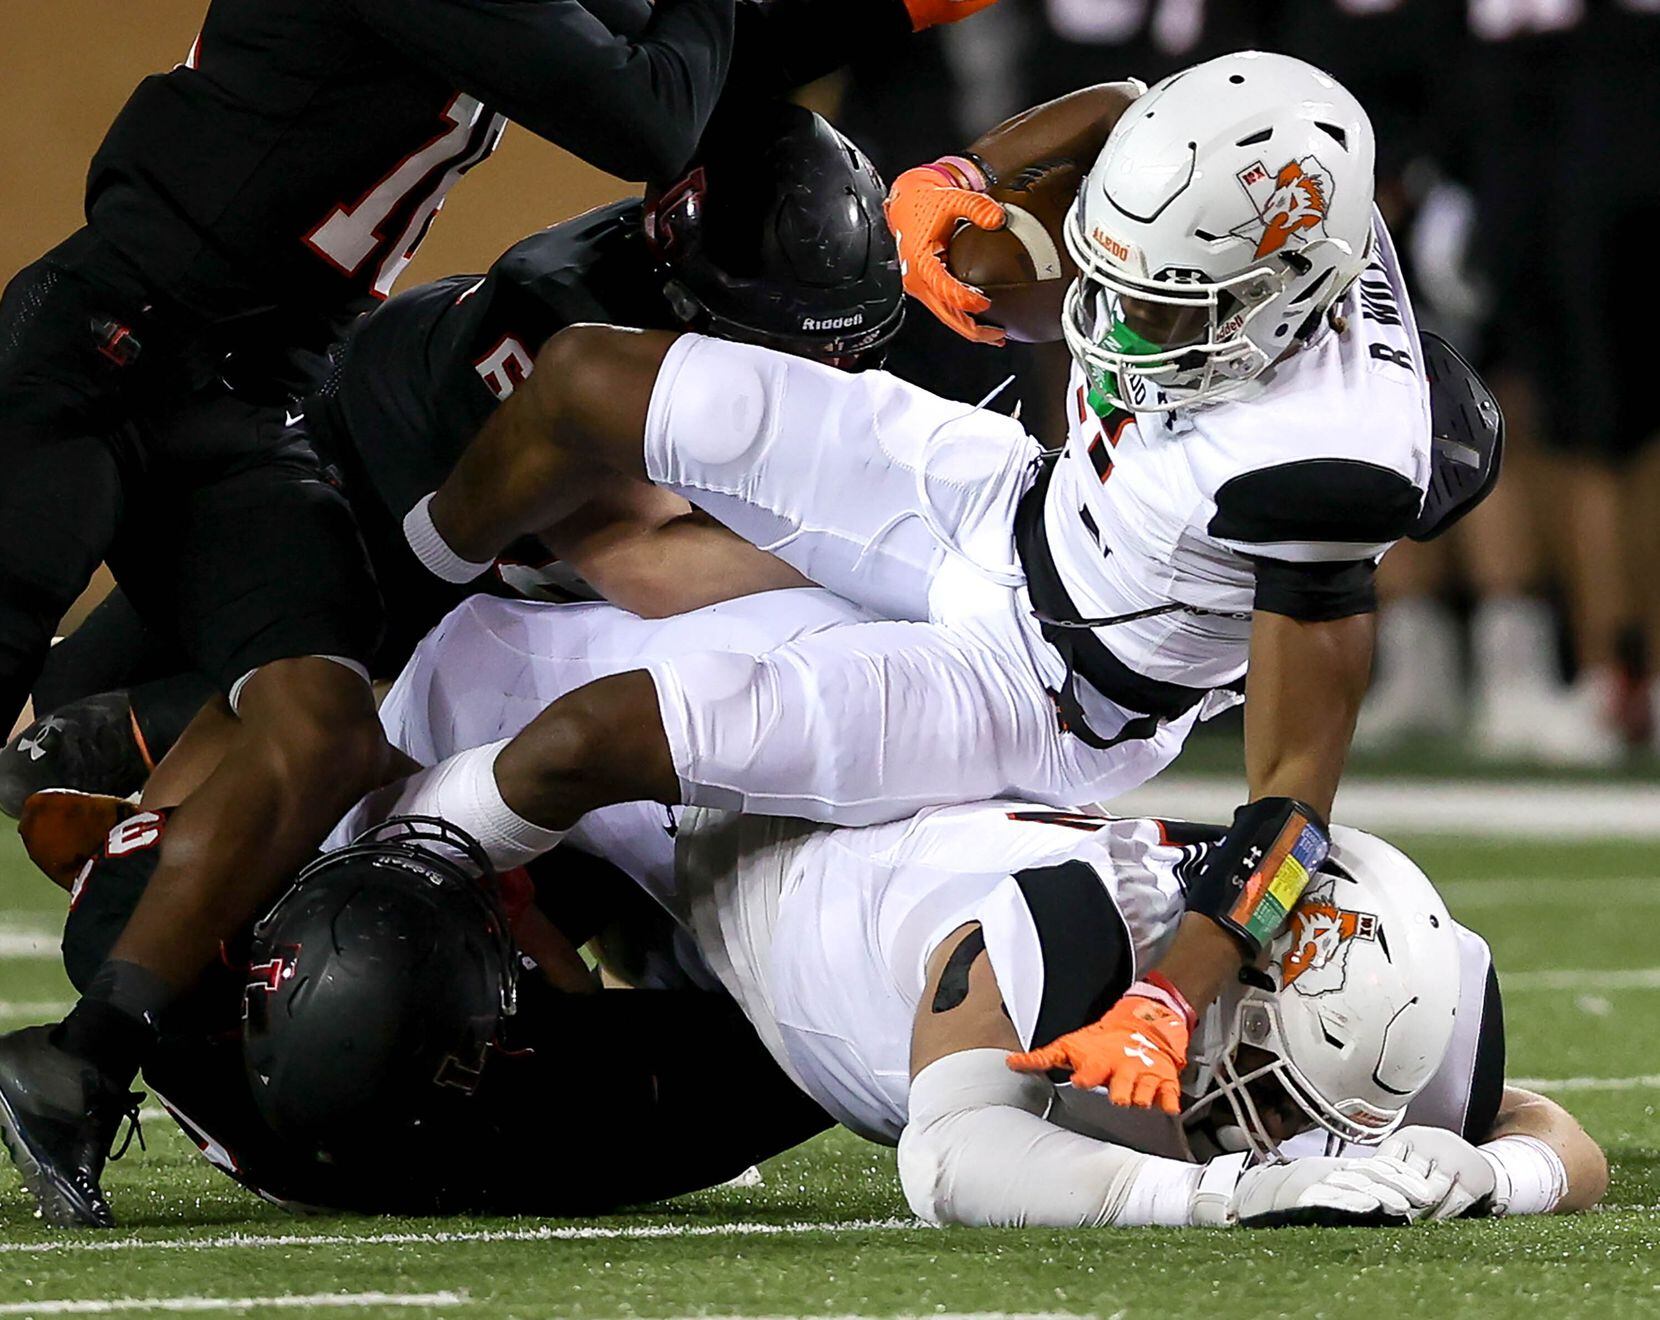 Aledo running back Ryan Williams rolls over his lineman for a first down against Frisco...